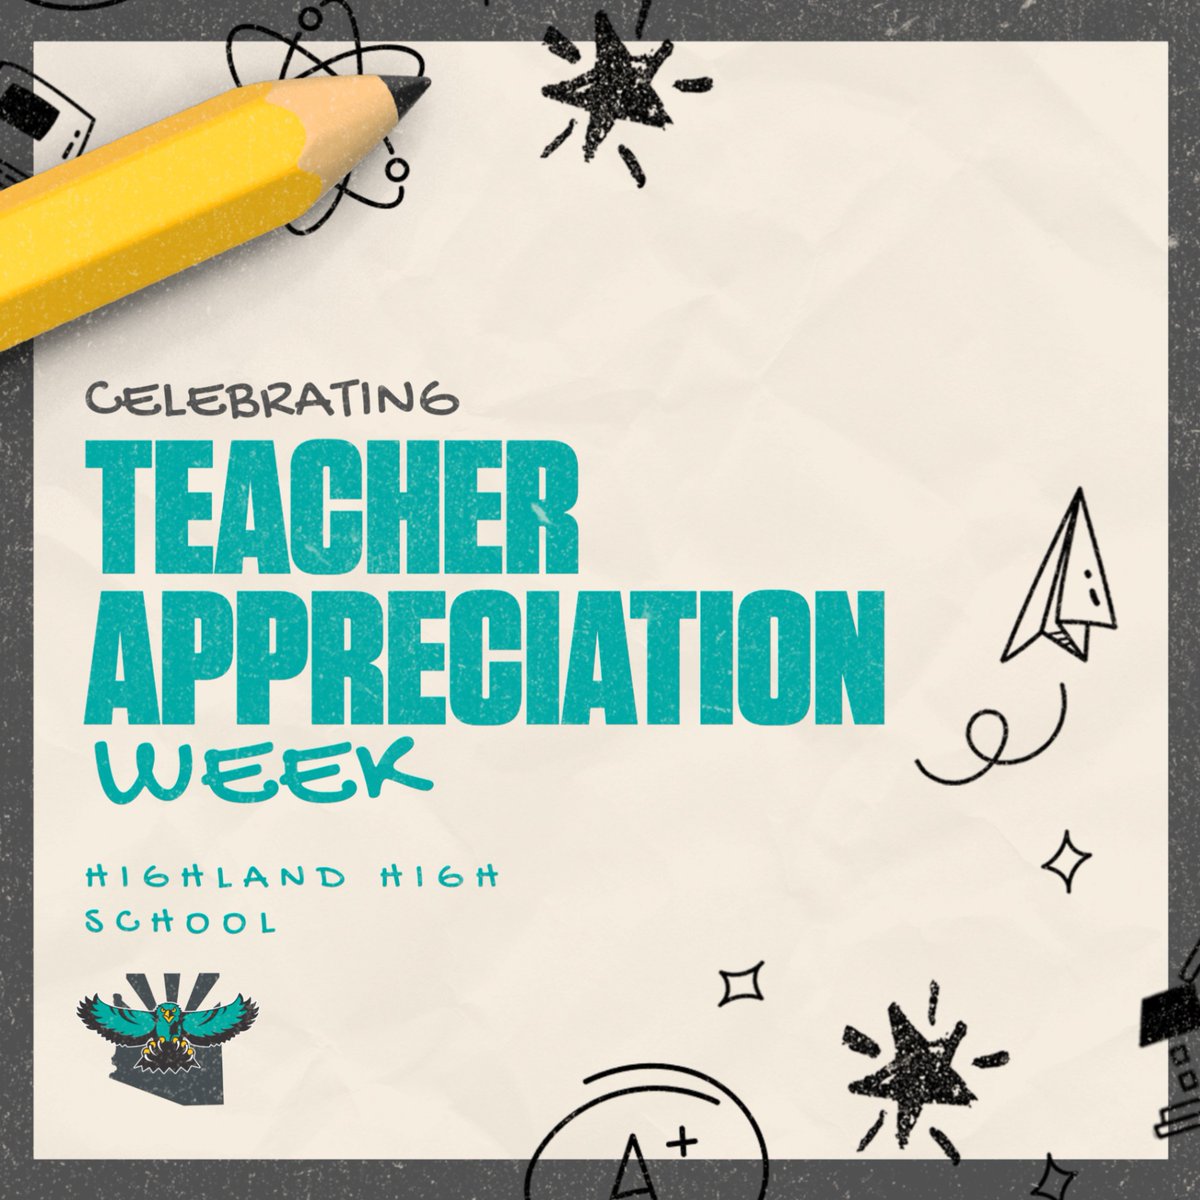 Thank you to all the teachers at HHS and in GPS for your dedication and countless hours you put in for our students! You guys are the true rockstars of this district!